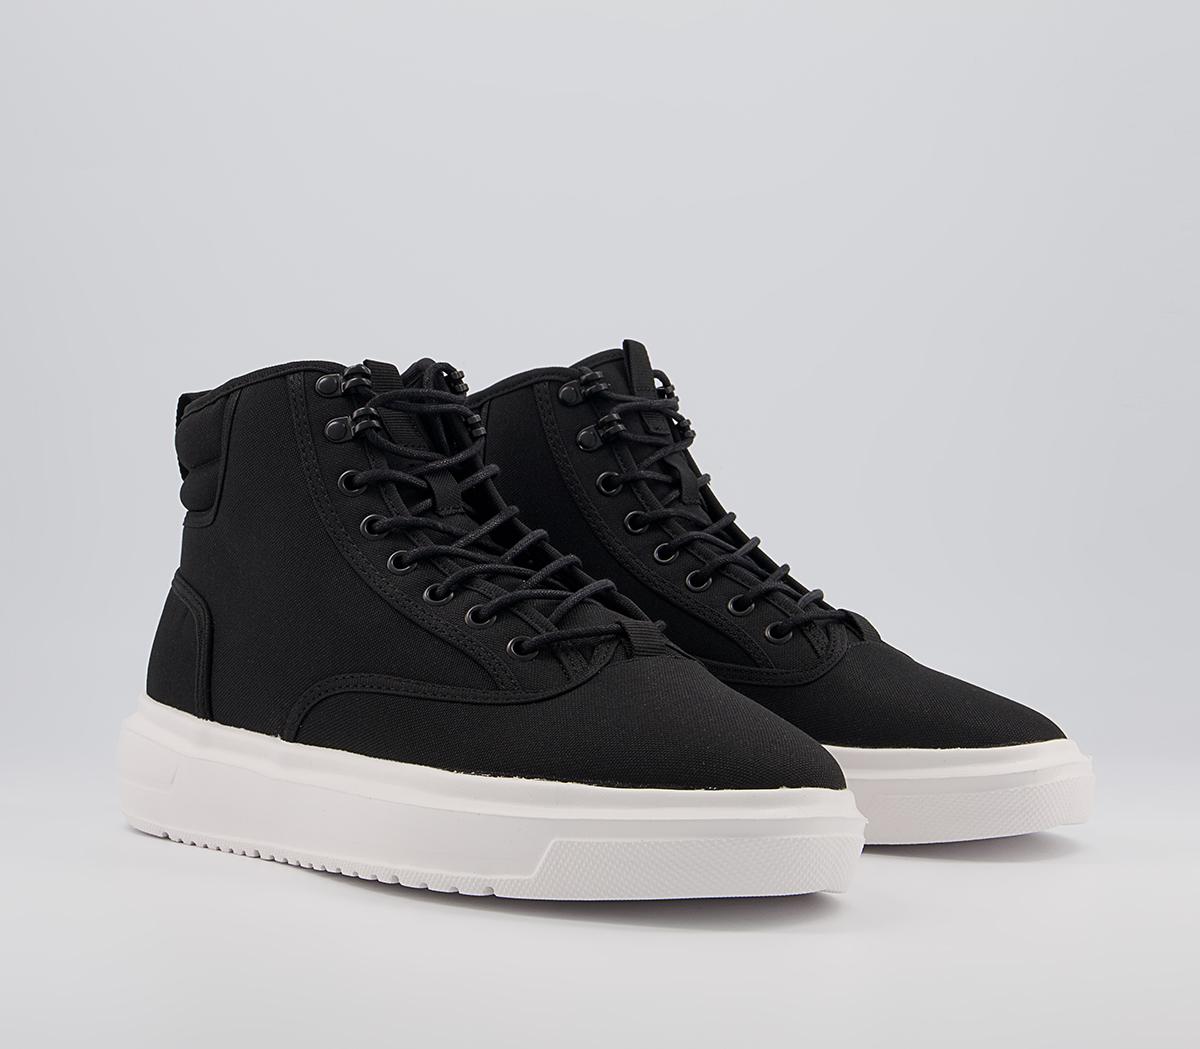 OFFICE Chino Mid Top Trainers Black - Men's Casual Shoes